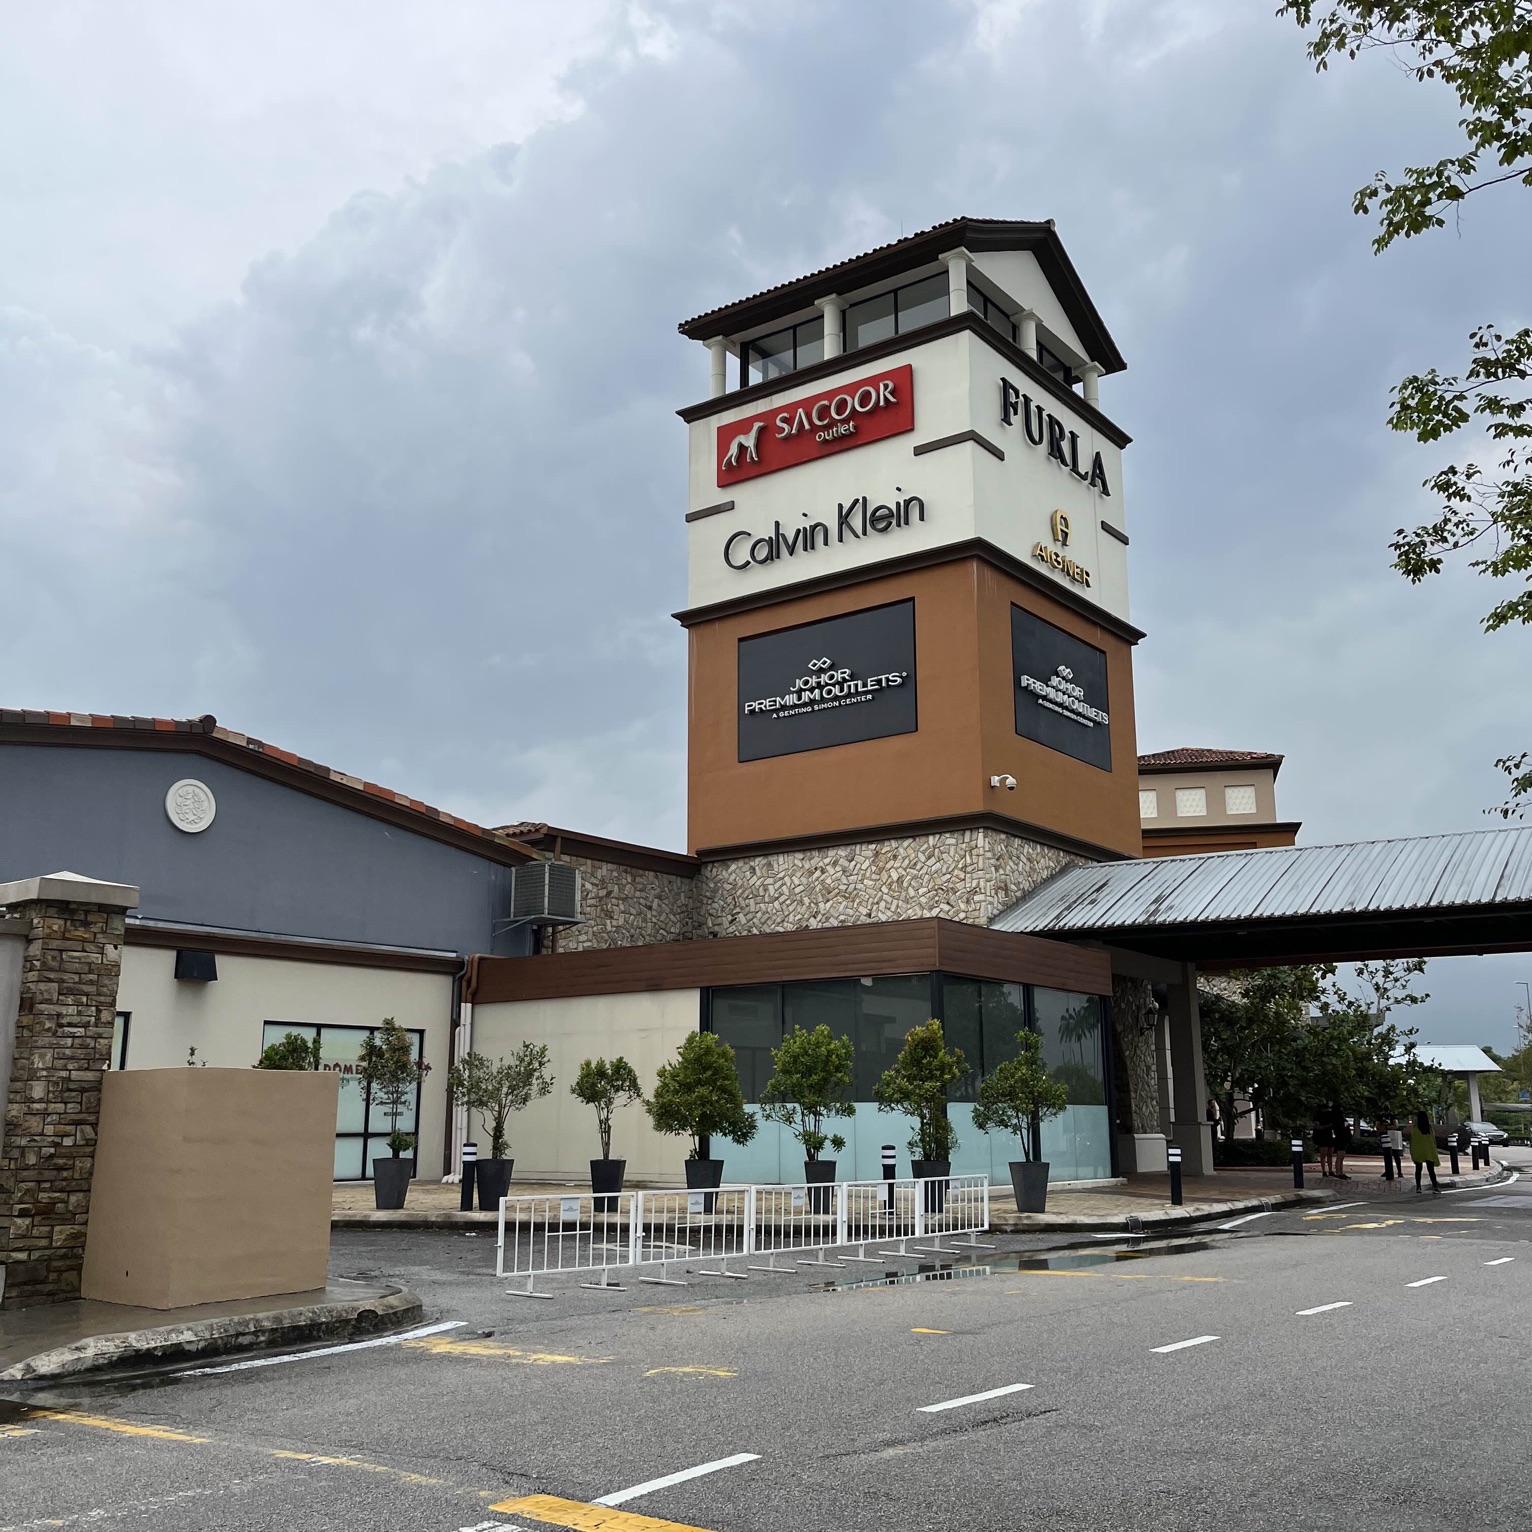 Private Johor Premium Outlets Shopping Tour from Kuala Lumpur 2023